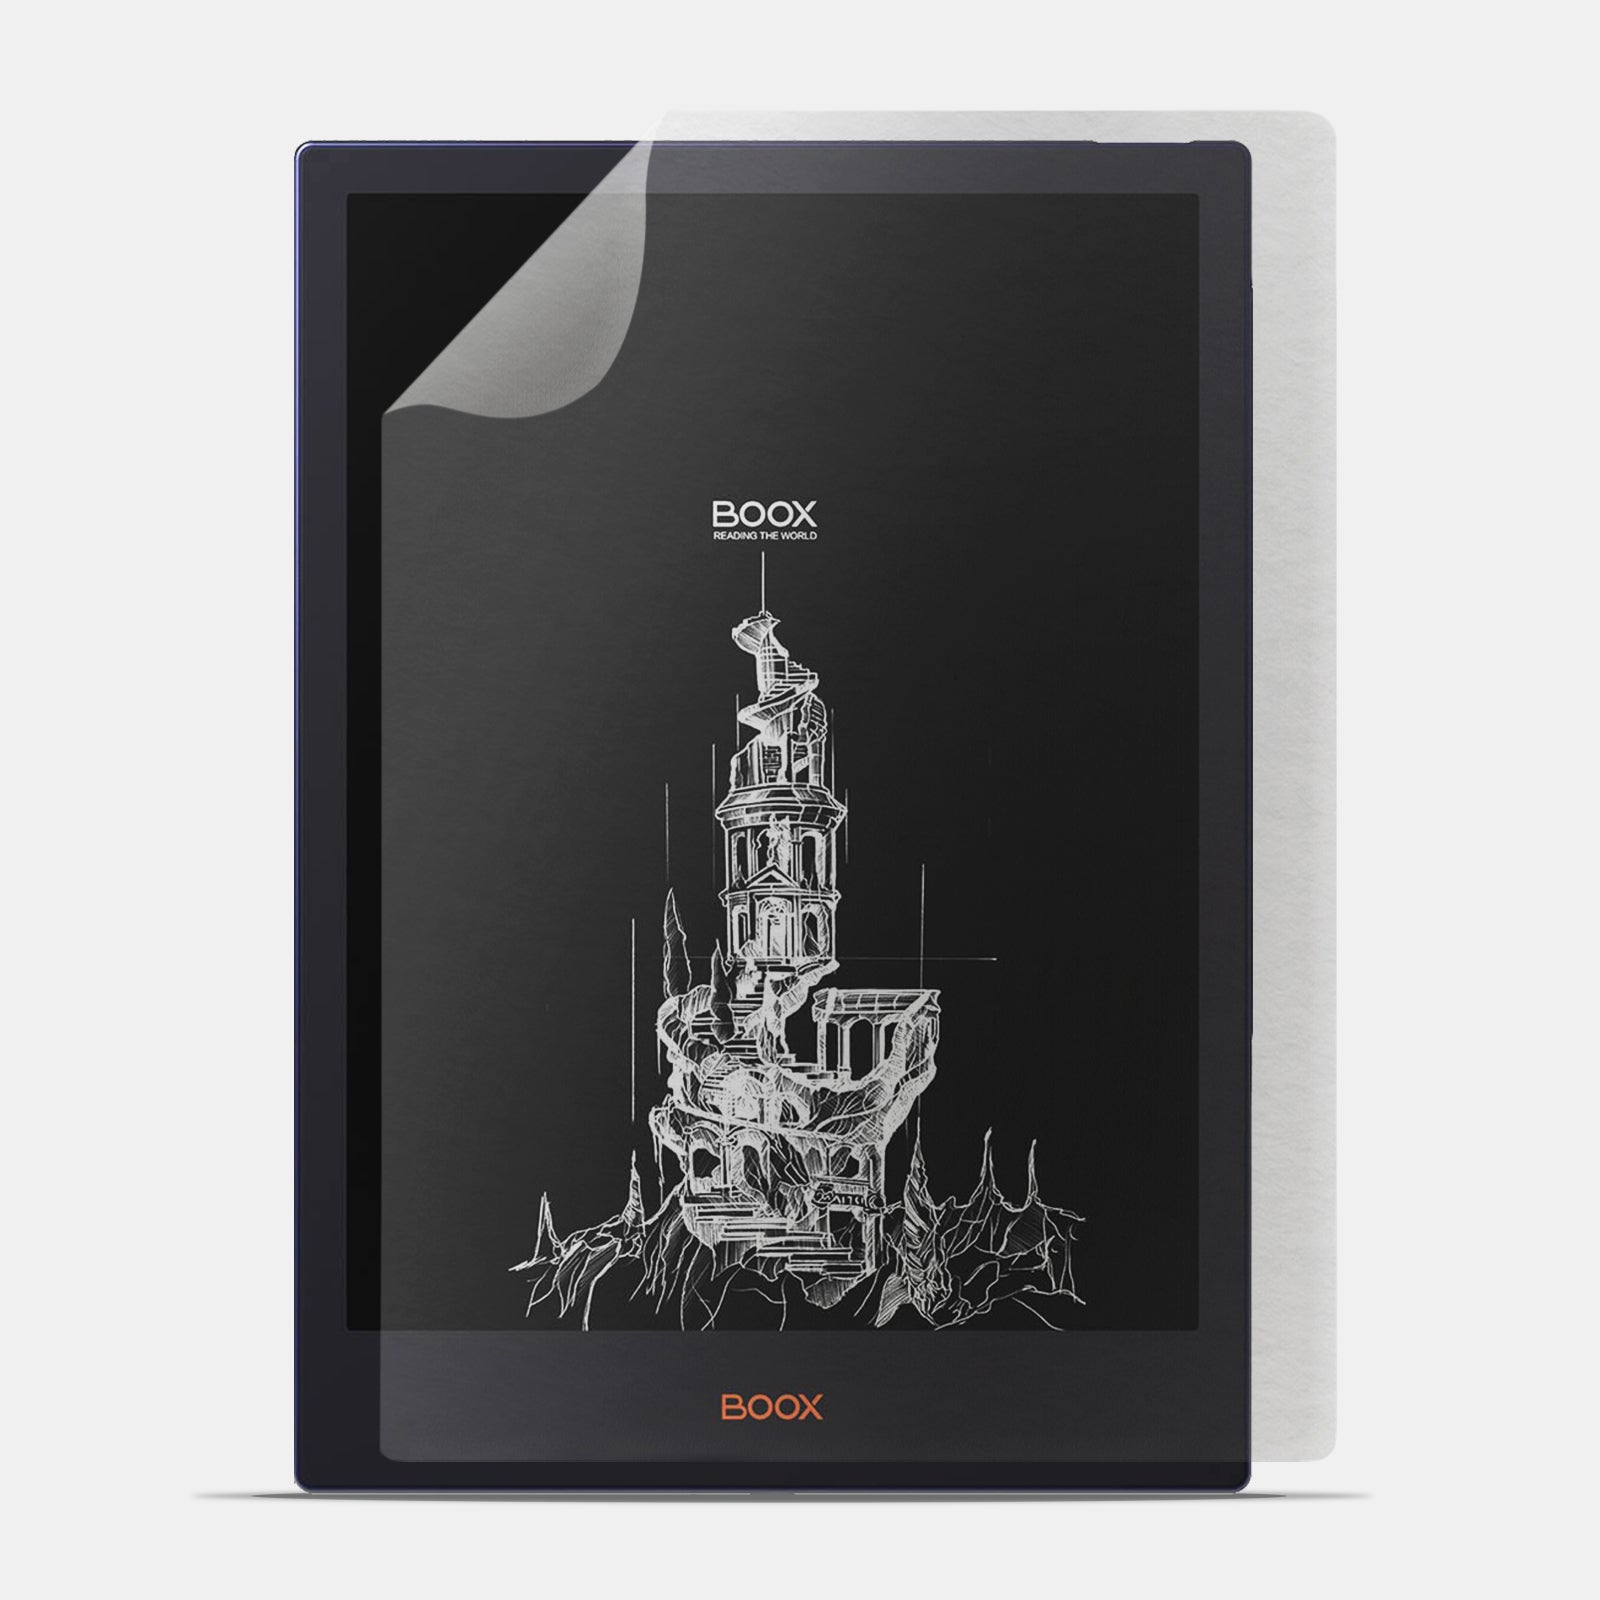 Discover the screen protectors for Onyx BOOX now on the